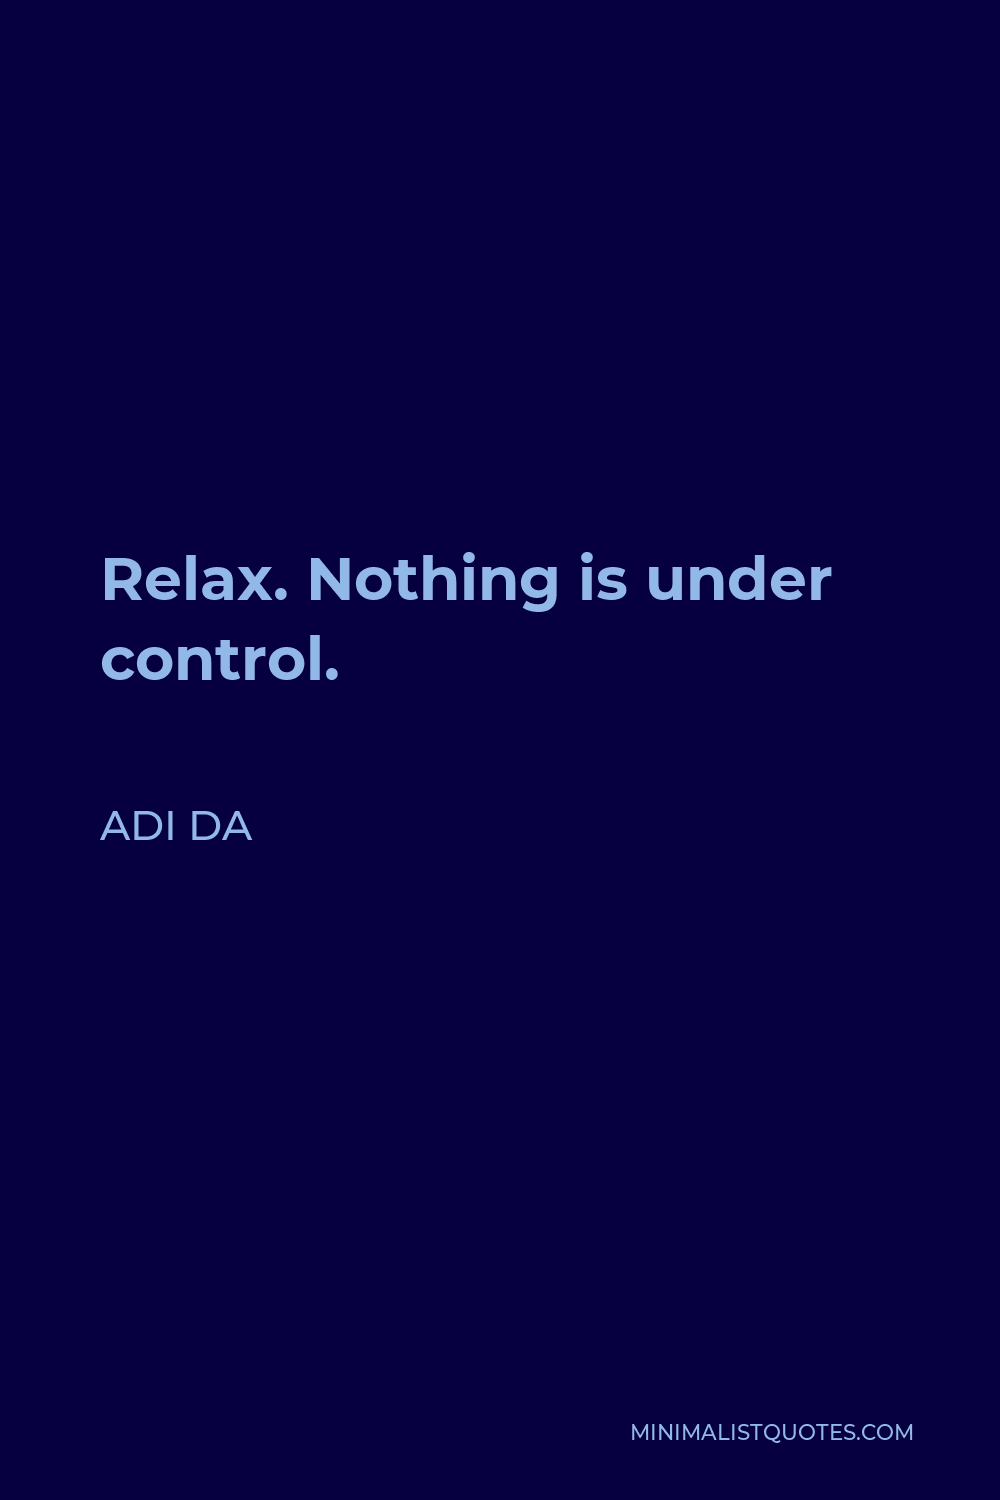 Adi Da Quote: “Relax. Nothing is under control.”